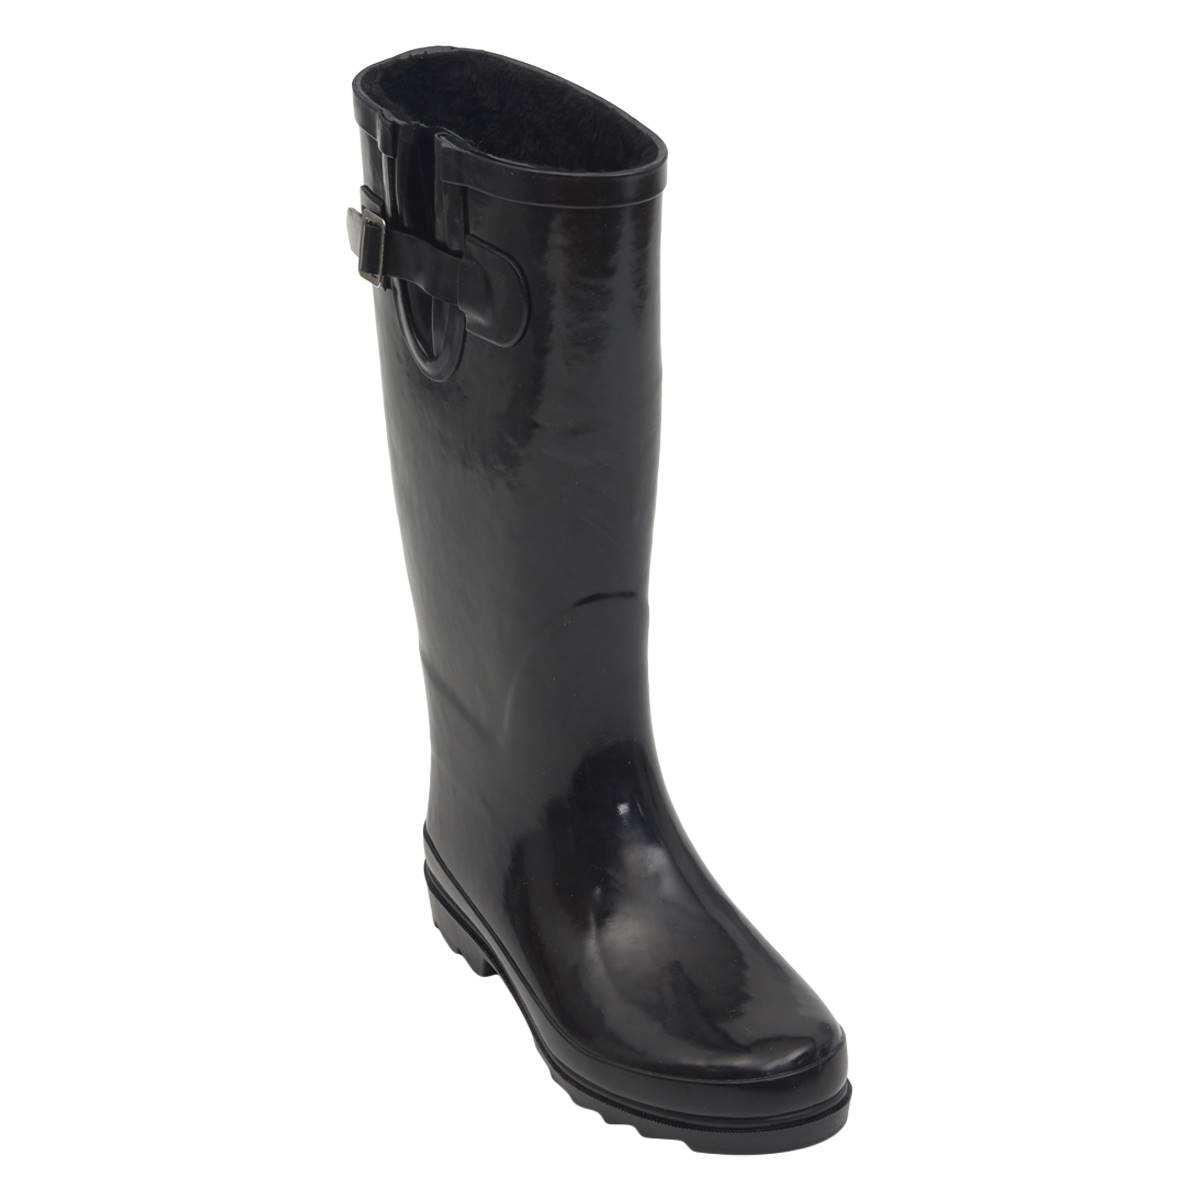 Womens Fifth & Luxe Tall Faux Fur Lined Rain Boots